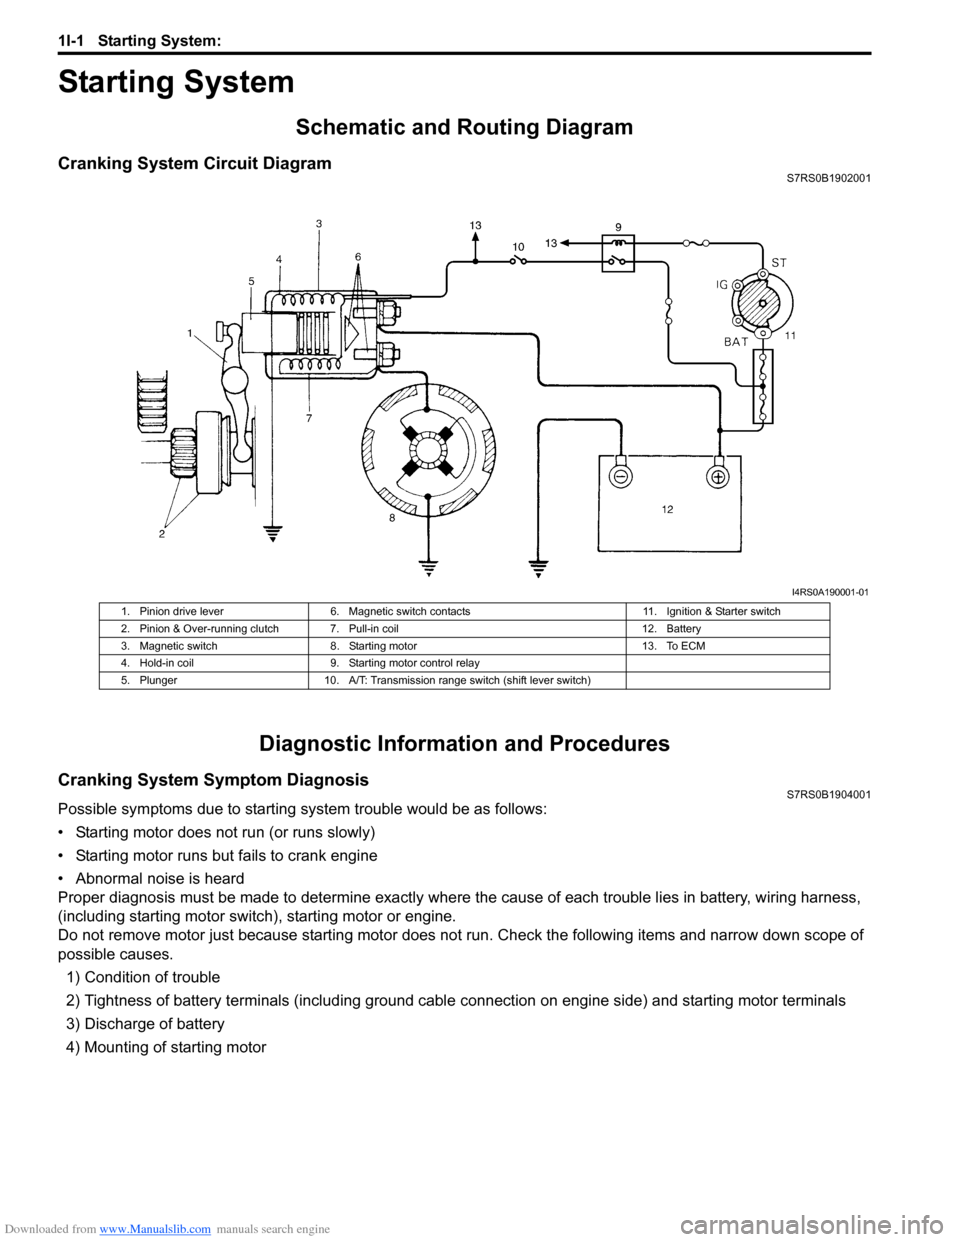 SUZUKI SWIFT 2006 2.G Service User Guide Downloaded from www.Manualslib.com manuals search engine 1I-1 Starting System: 
Engine
Starting System
Schematic and Routing Diagram
Cranking System Circuit DiagramS7RS0B1902001
Diagnostic Information